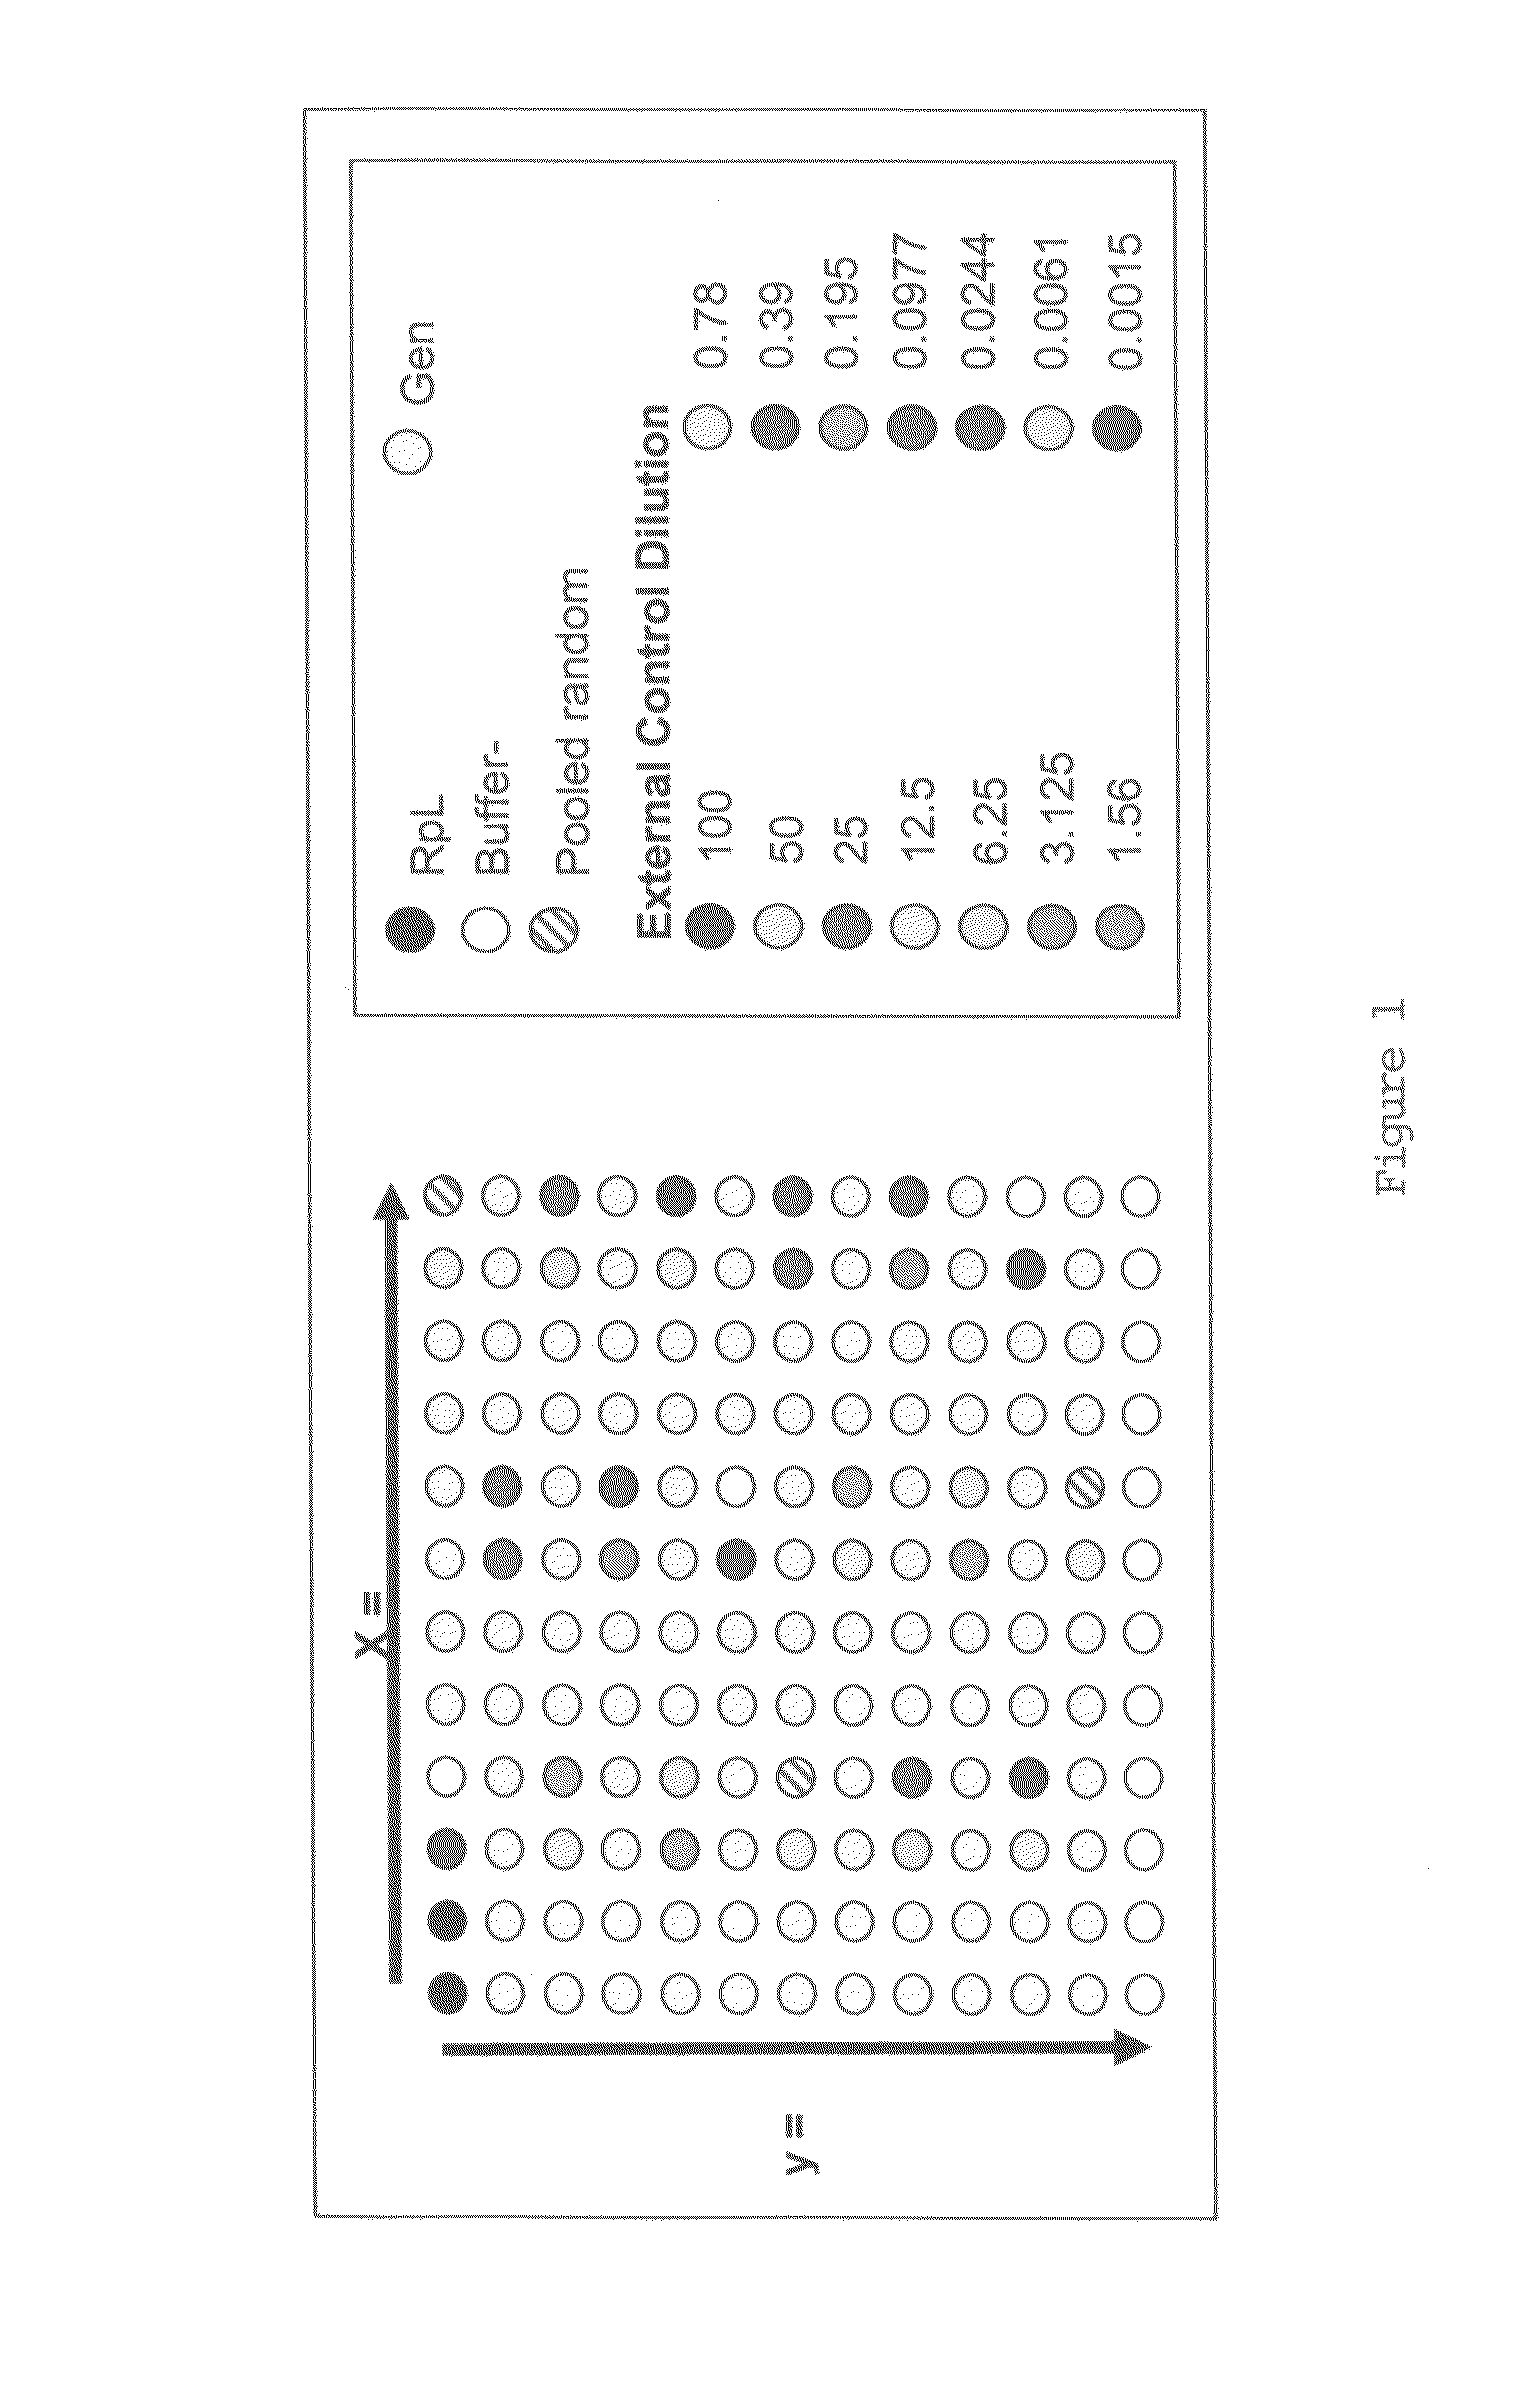 In situ dilution of external controls for use in microarrays